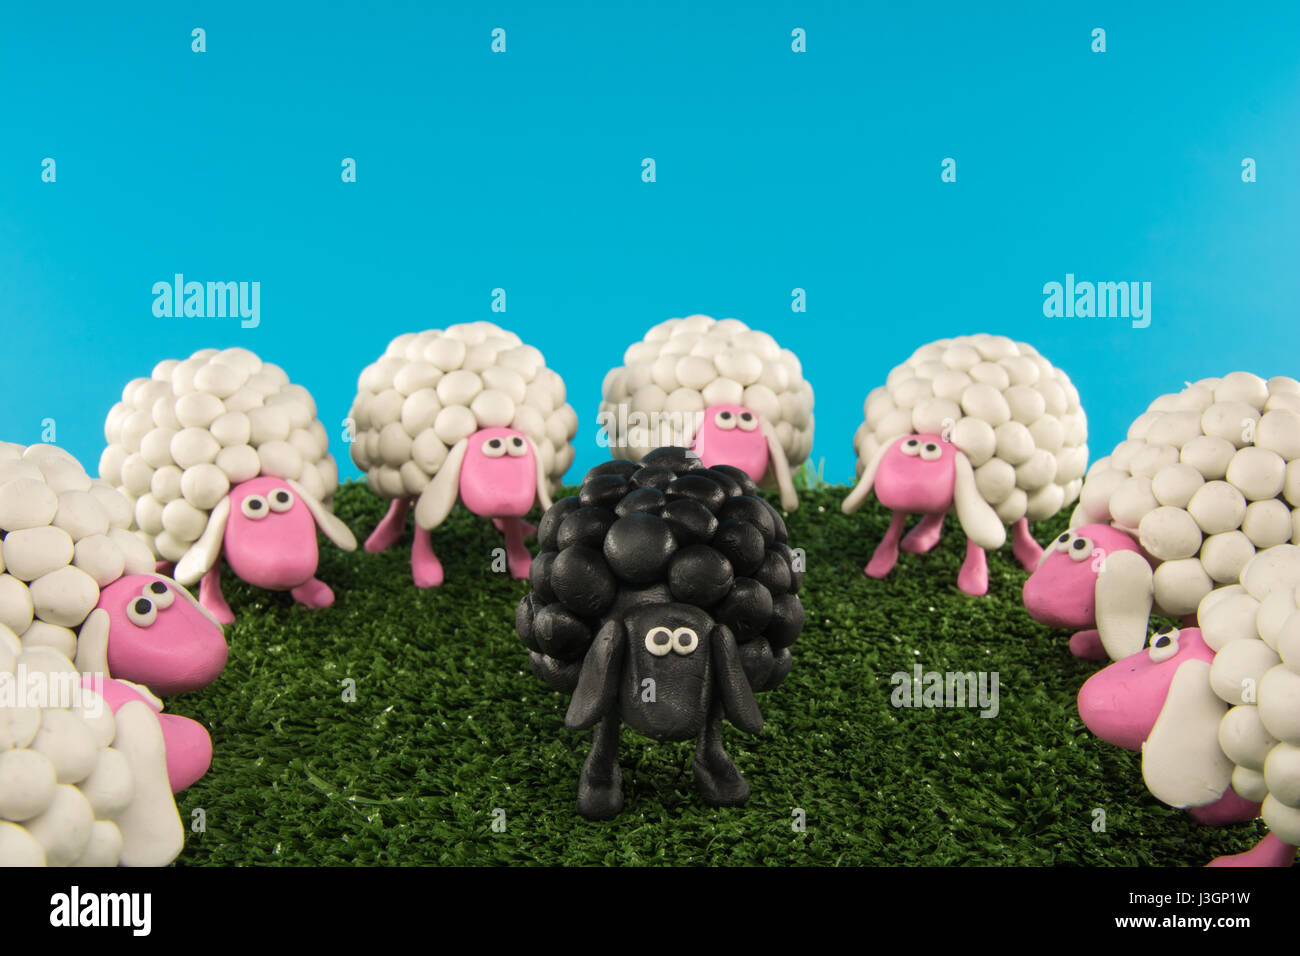 Concept - A circle of white sheep surrounds one black sheep, placed on a grassy surface Stock Photo